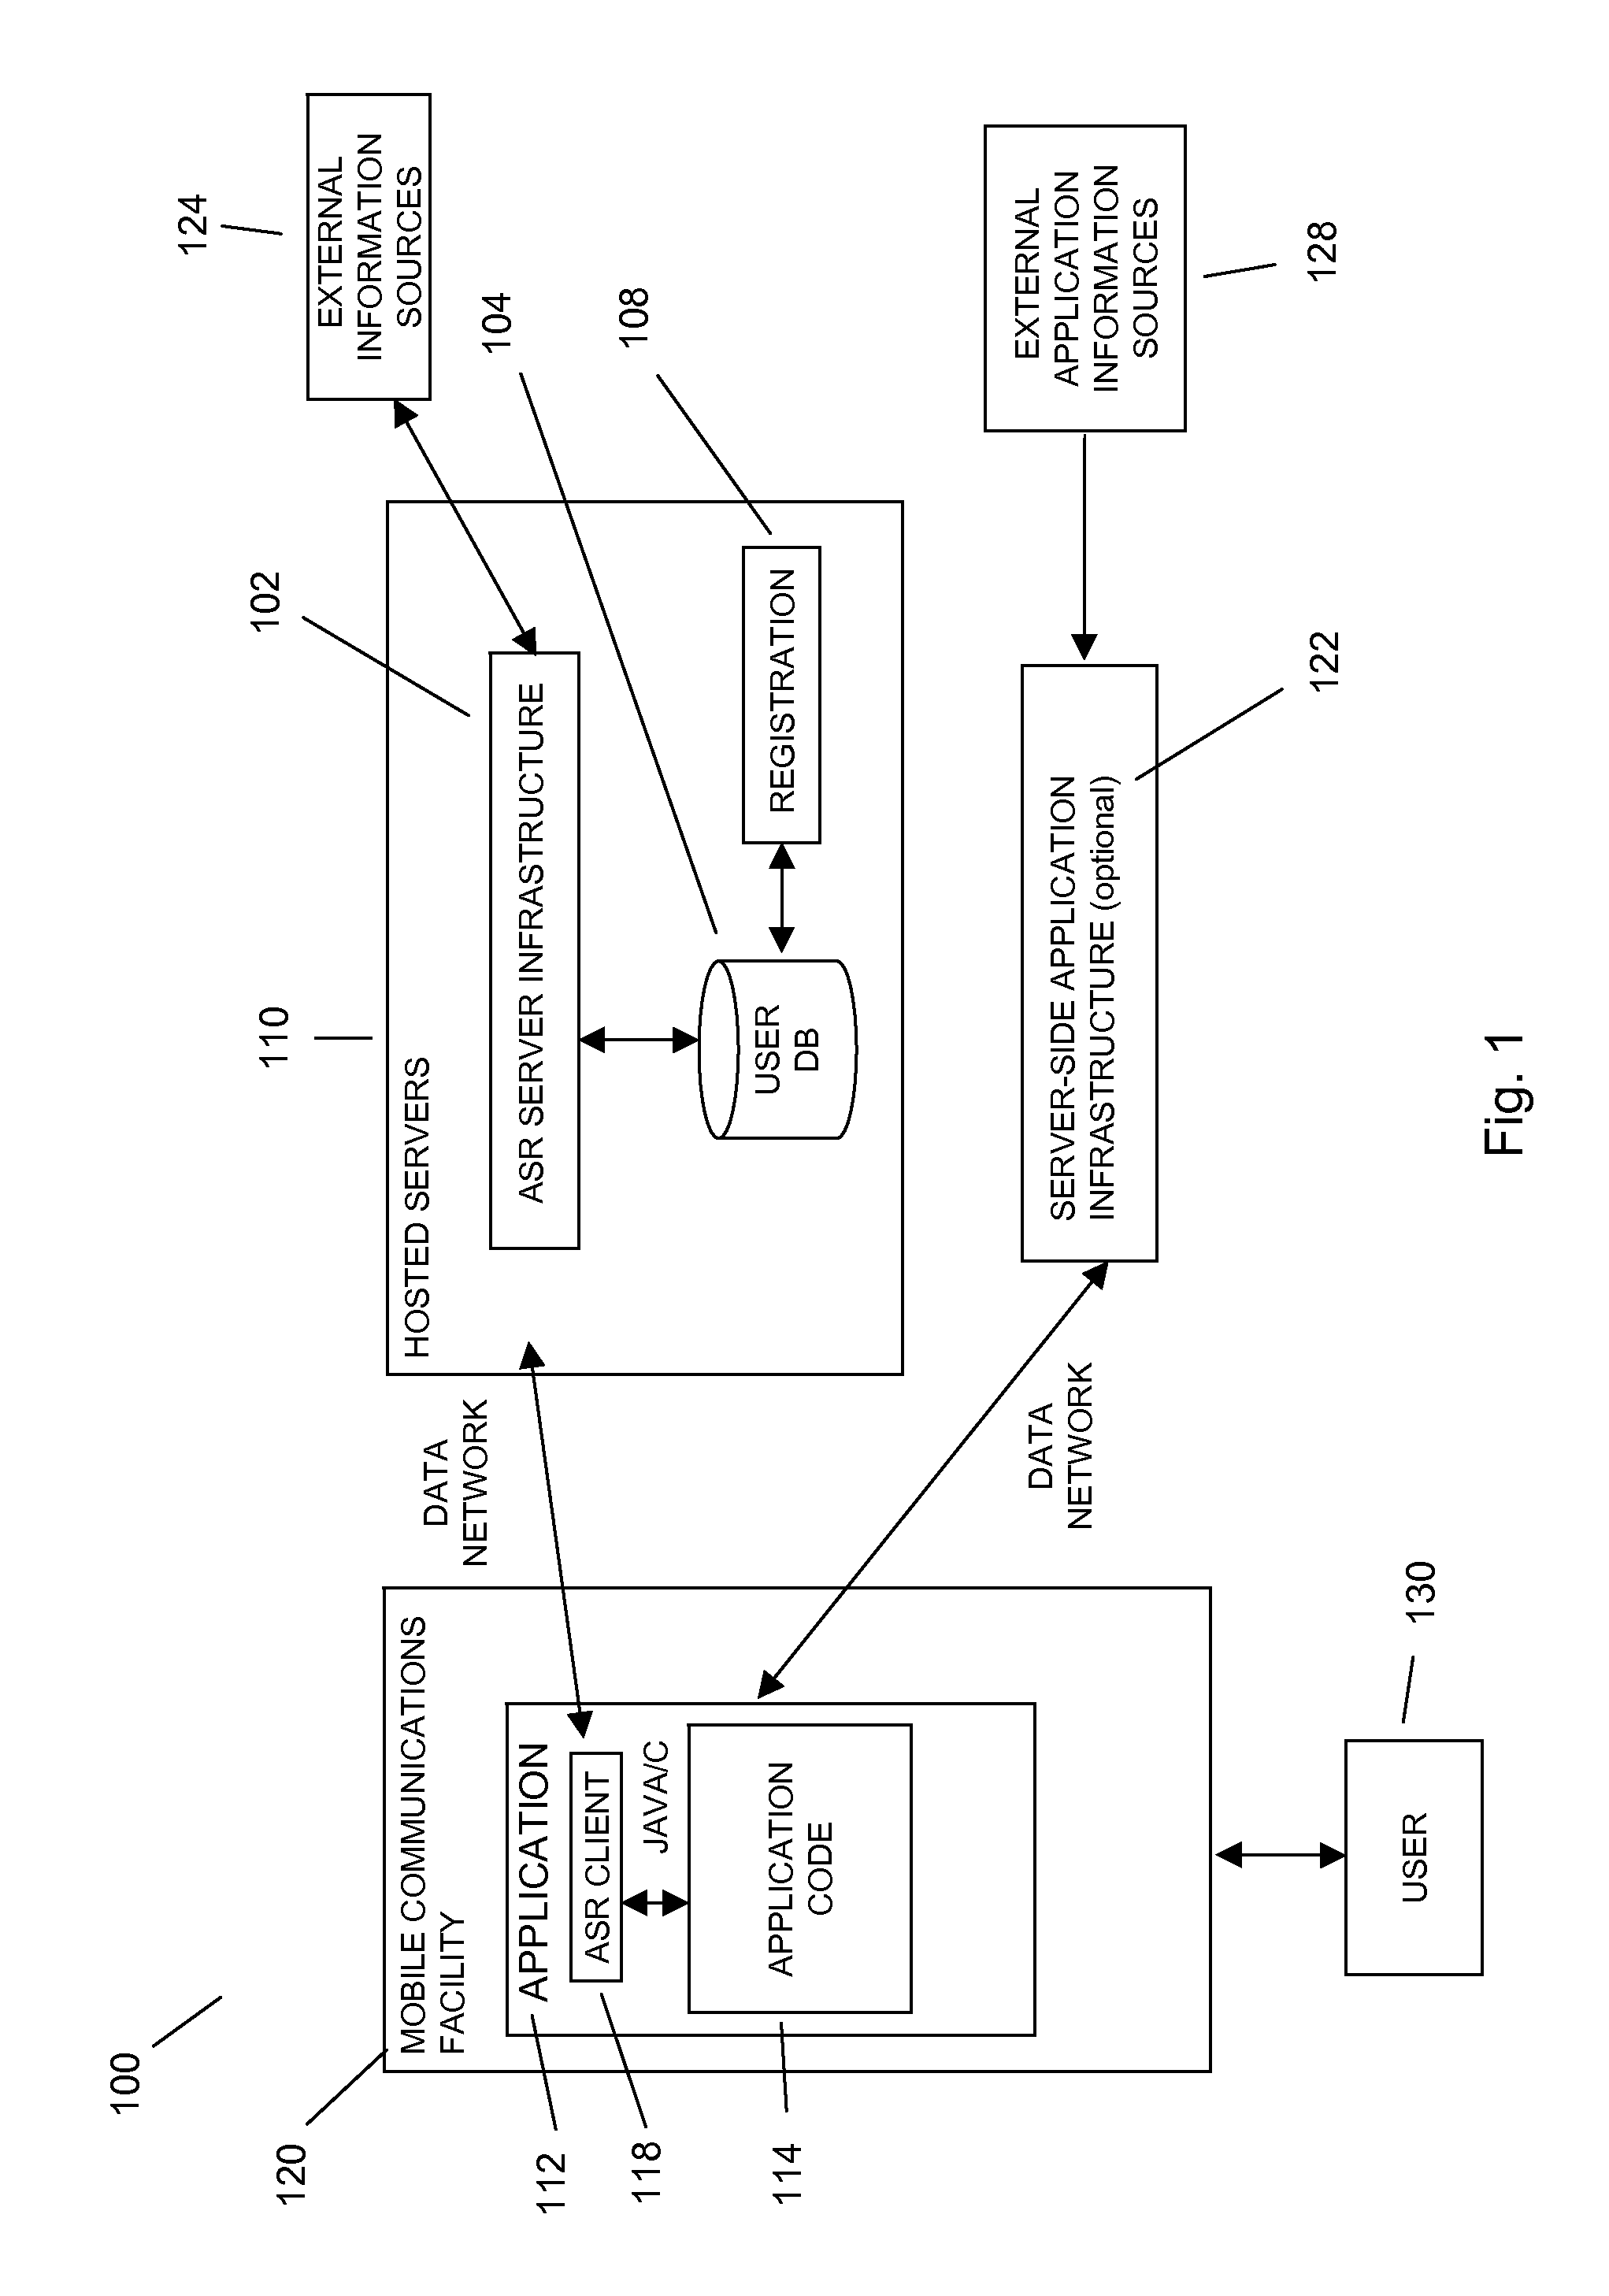 Command and control utilizing ancillary information in a mobile voice-to-speech application